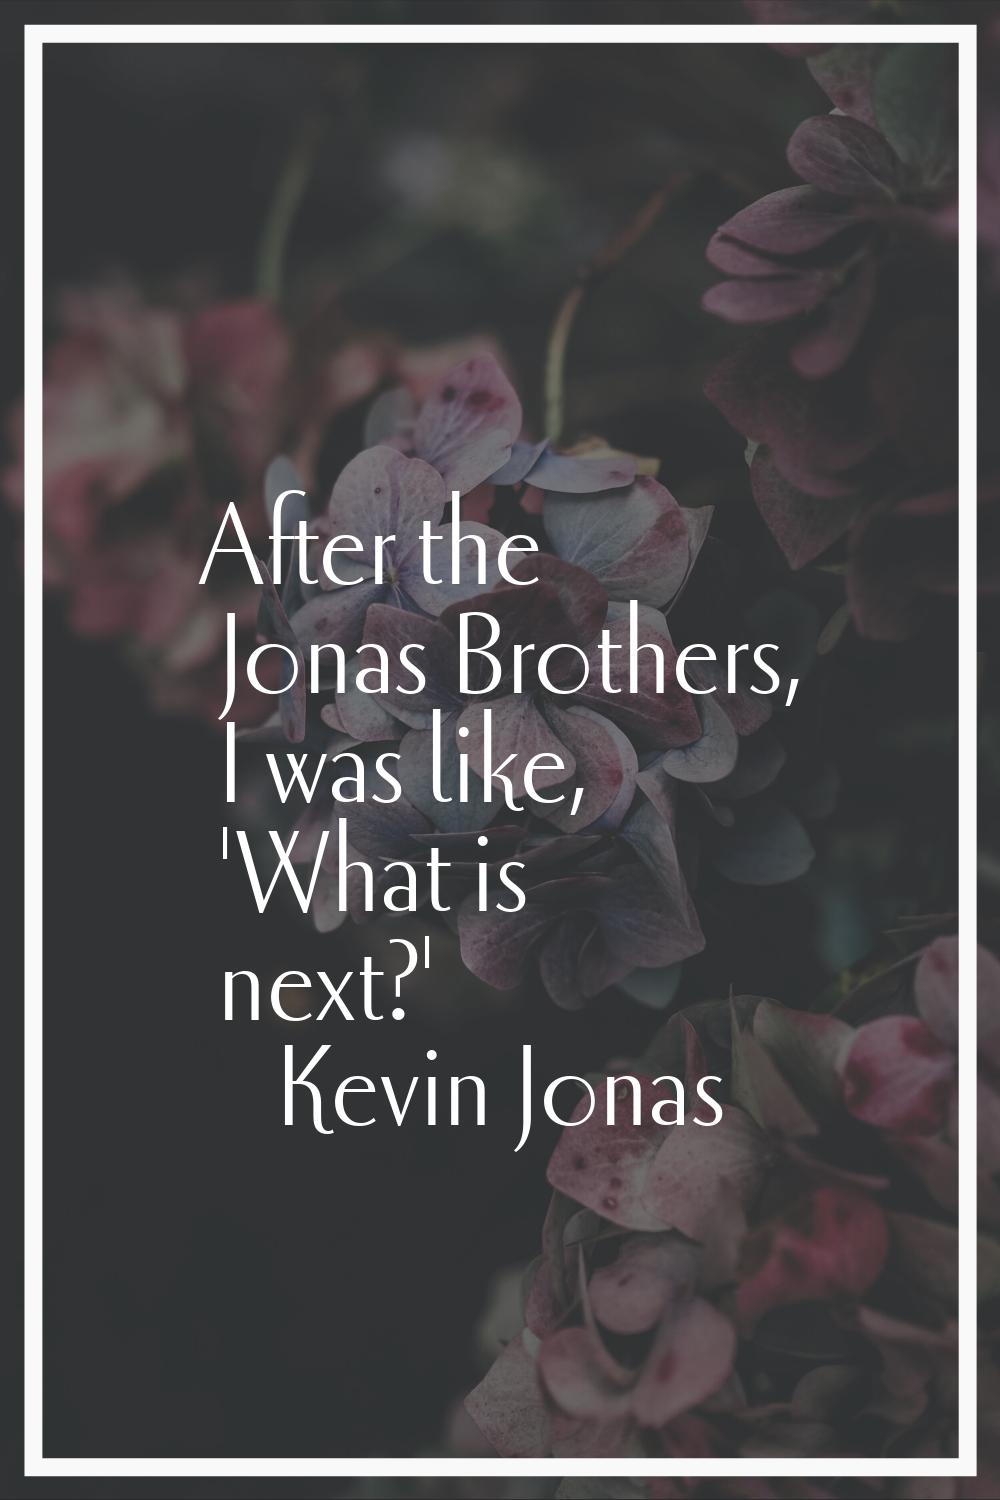 After the Jonas Brothers, I was like, 'What is next?'